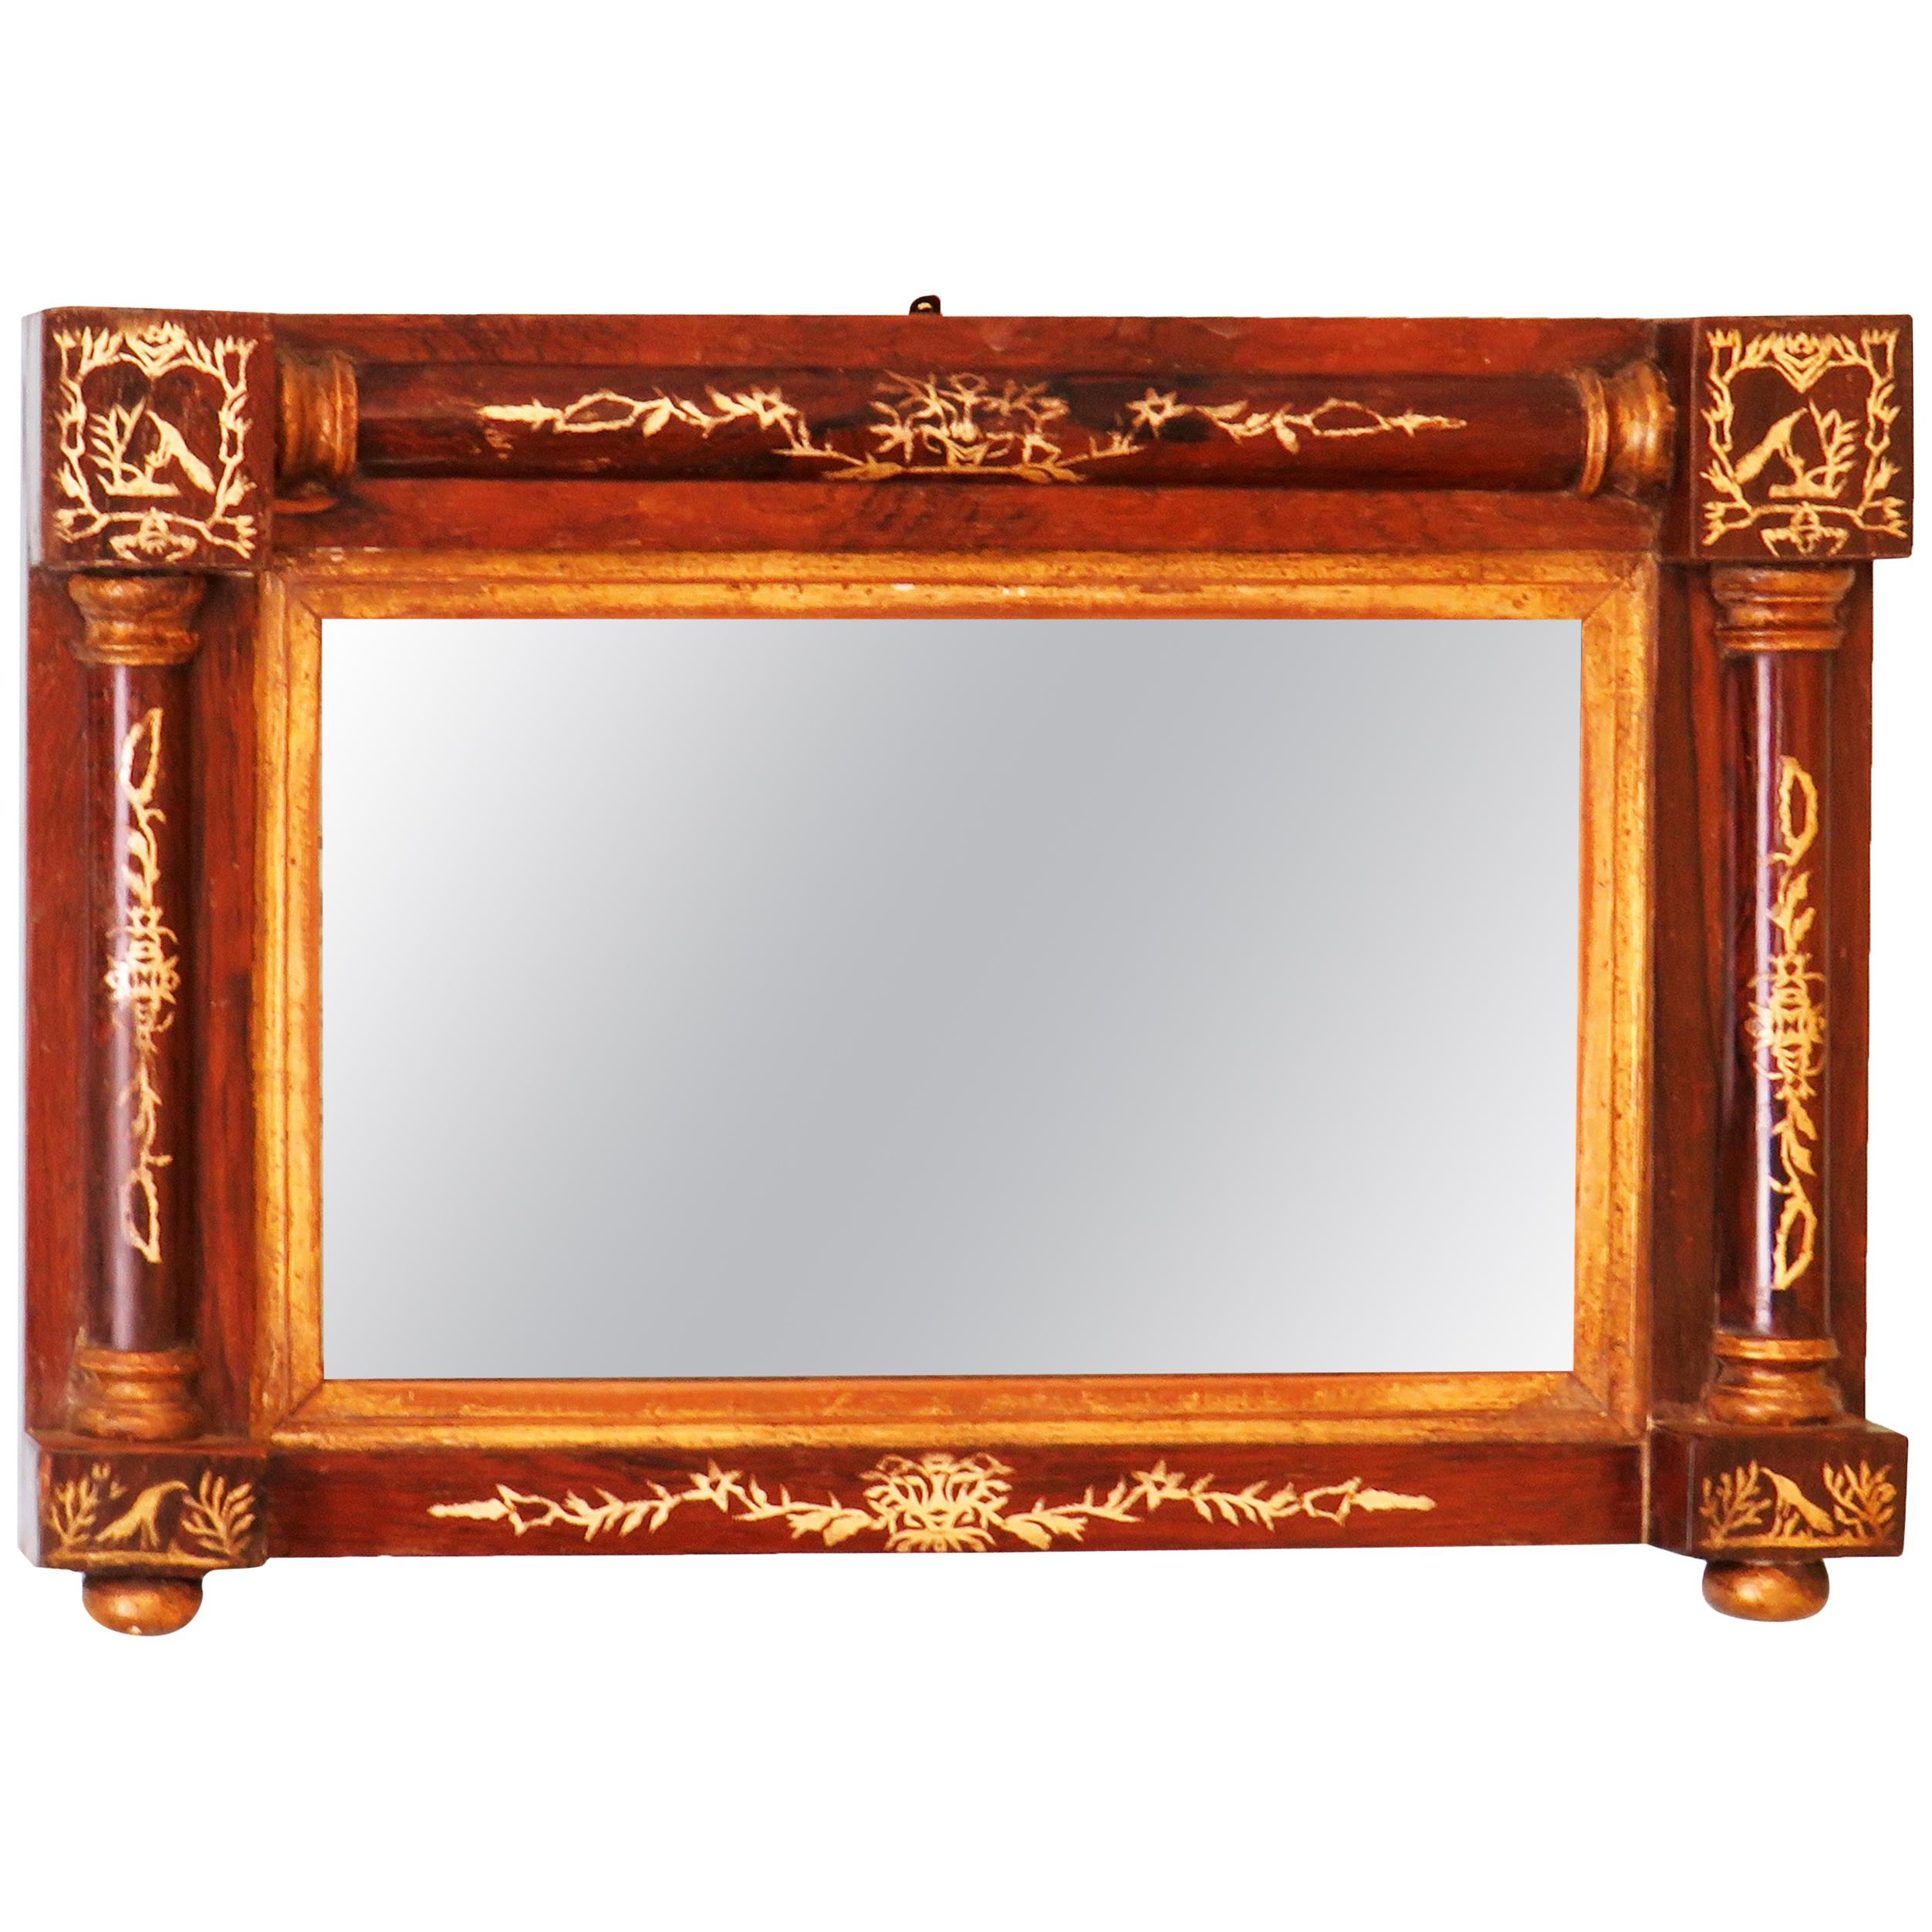 Regency English Rosewood And Gilt Wall Mirror